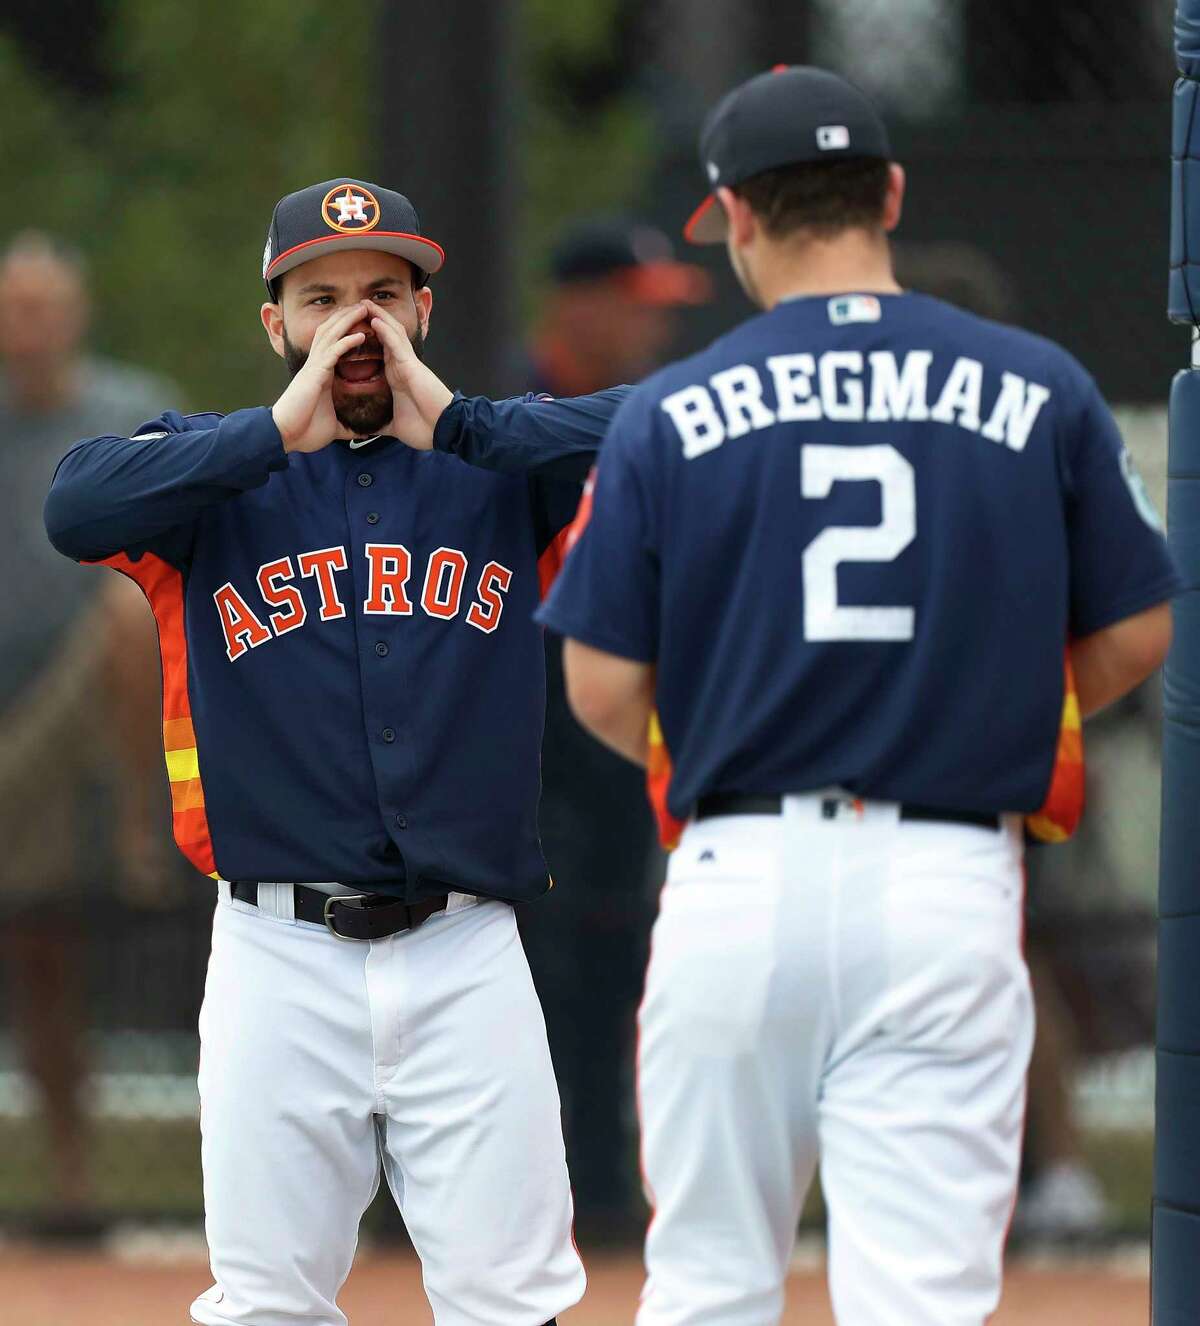 Houston Astros Jose Altuve (27) messes around with Alex Bregman (2) during spring training at The Ballpark of the Palm Beaches, in West Palm Beach, Florida, Wednesday, February 22, 2017.